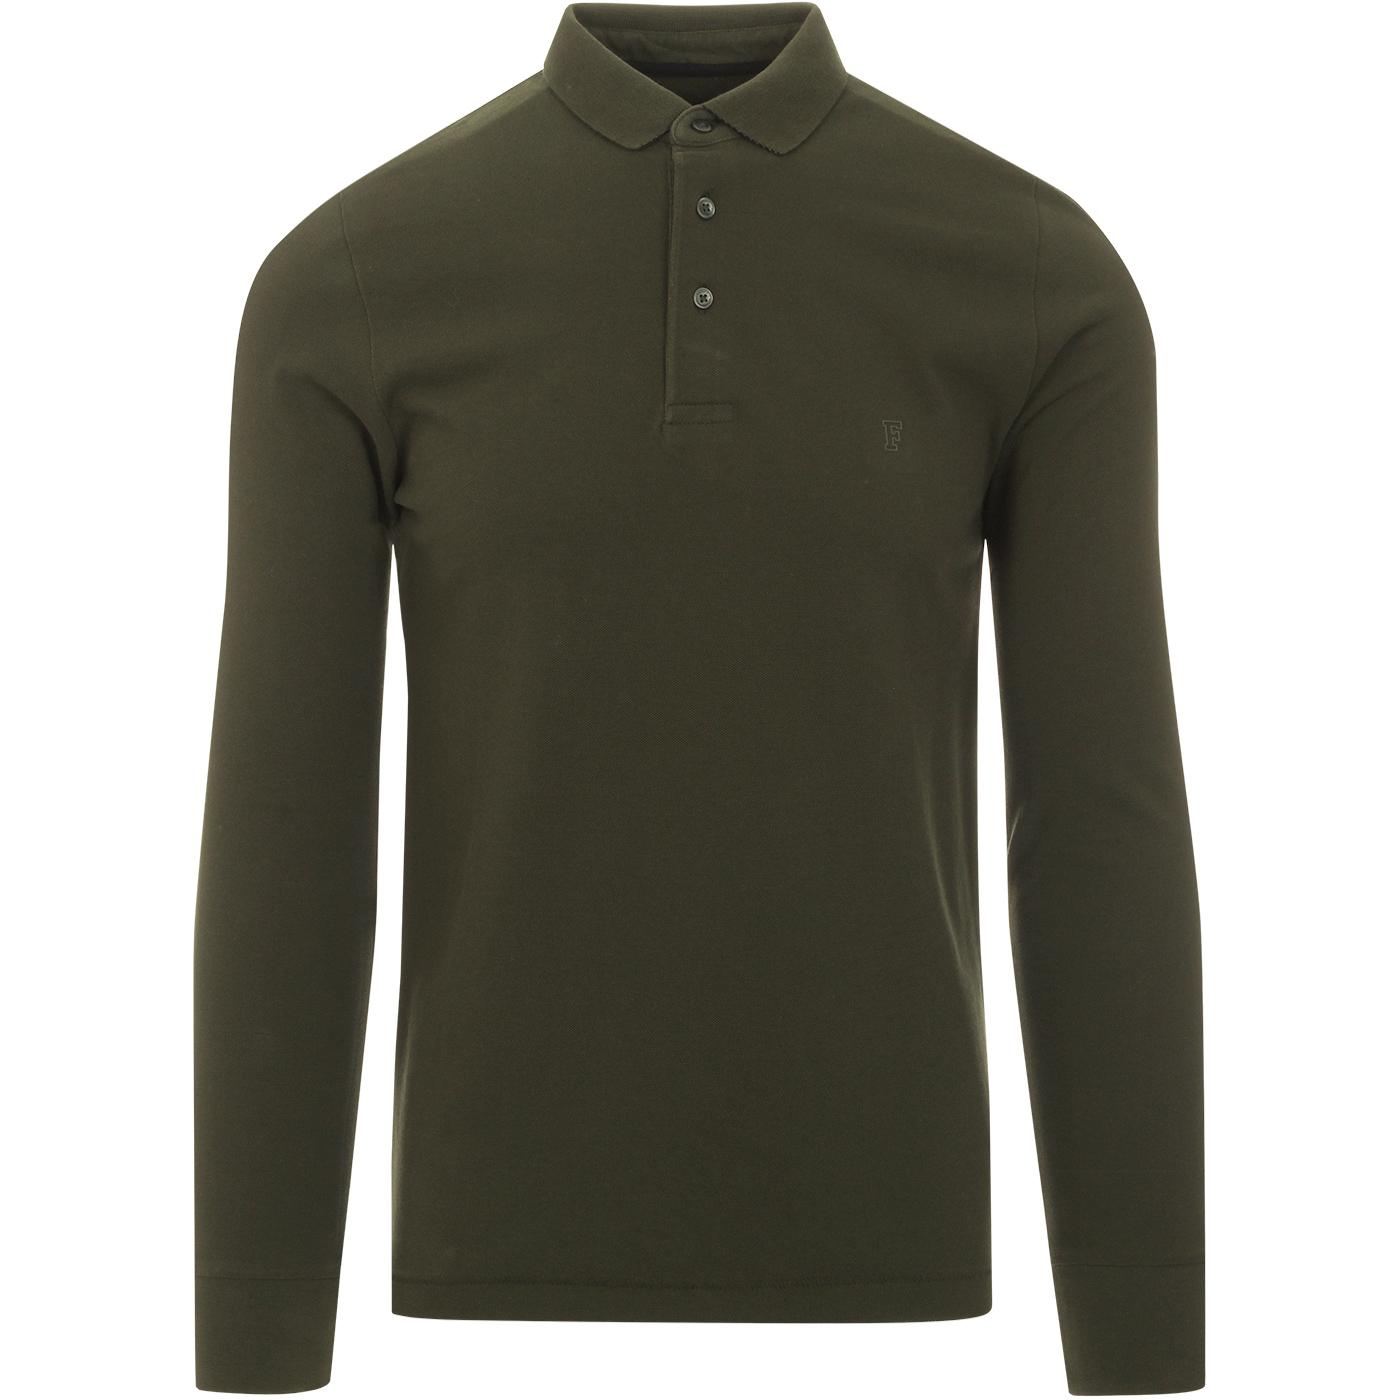 FRENCH CONNECTION Retro Mod Brunswick Polo in Forest